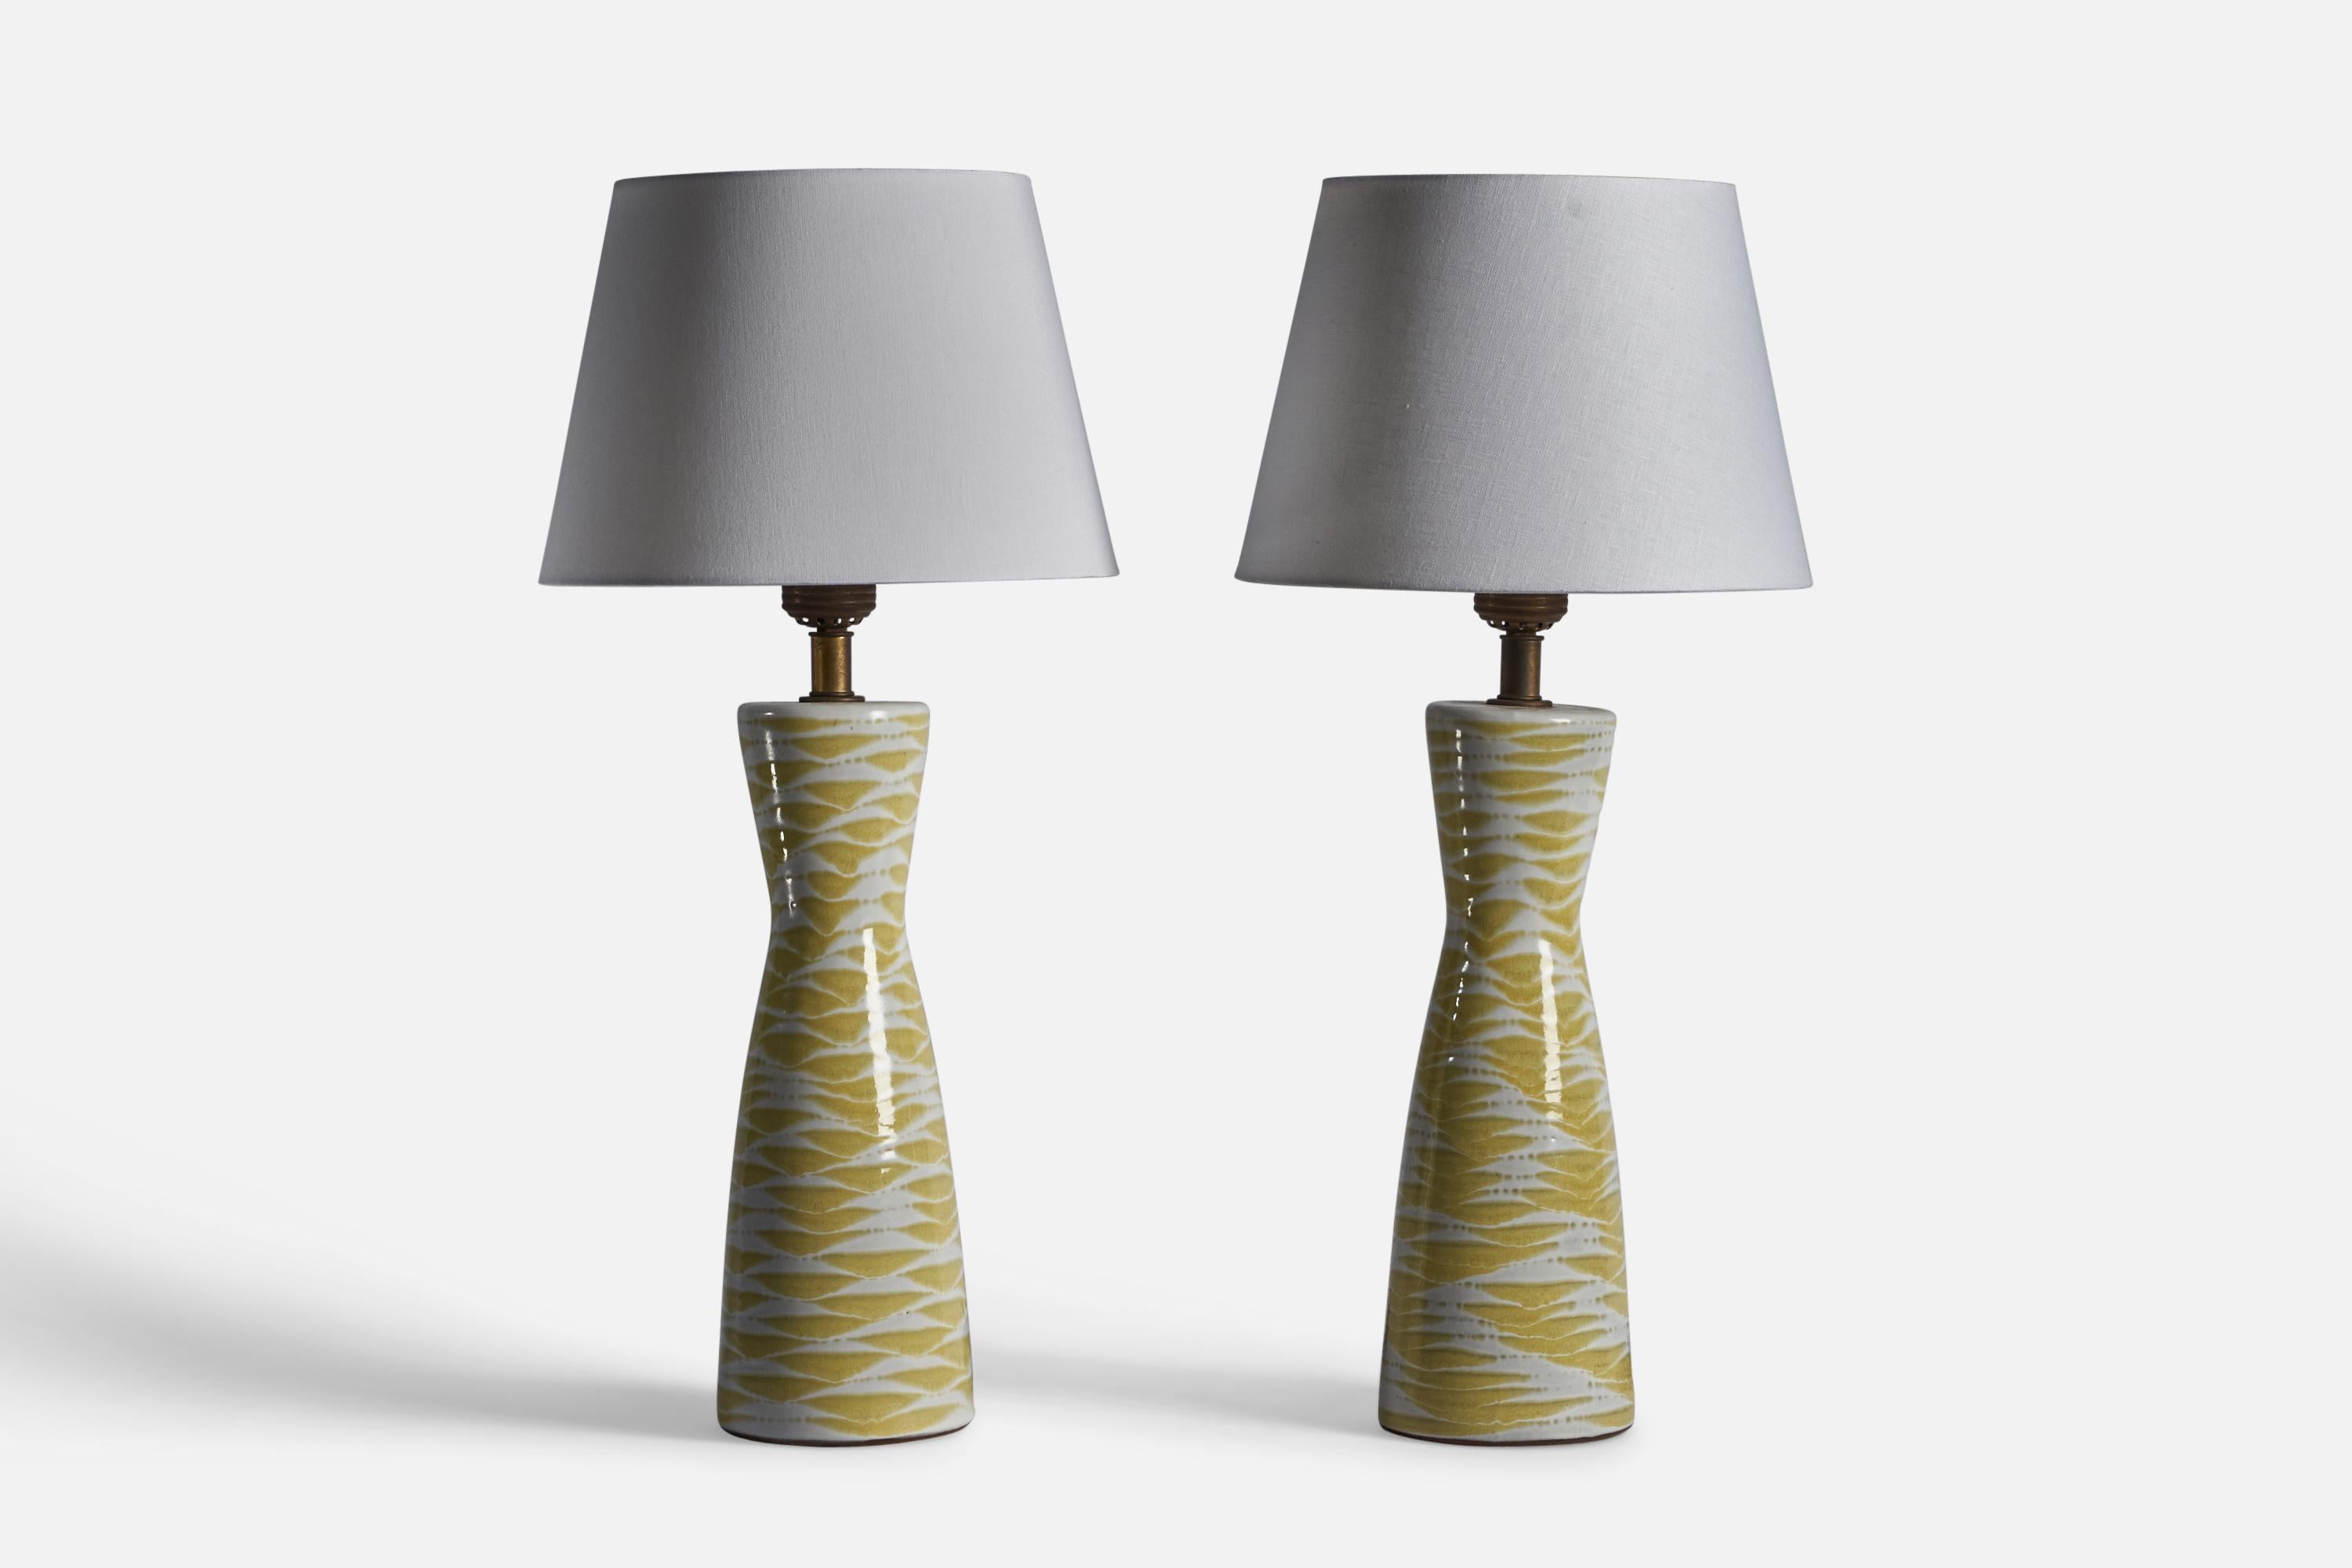 A pair of large yellow-glazed ceramic and brass table lamps, designed by Lee Rosen and produced by DESIGN-TECHNICS, USA, c. 1950s.

Dimensions of Lamp (inches): 30